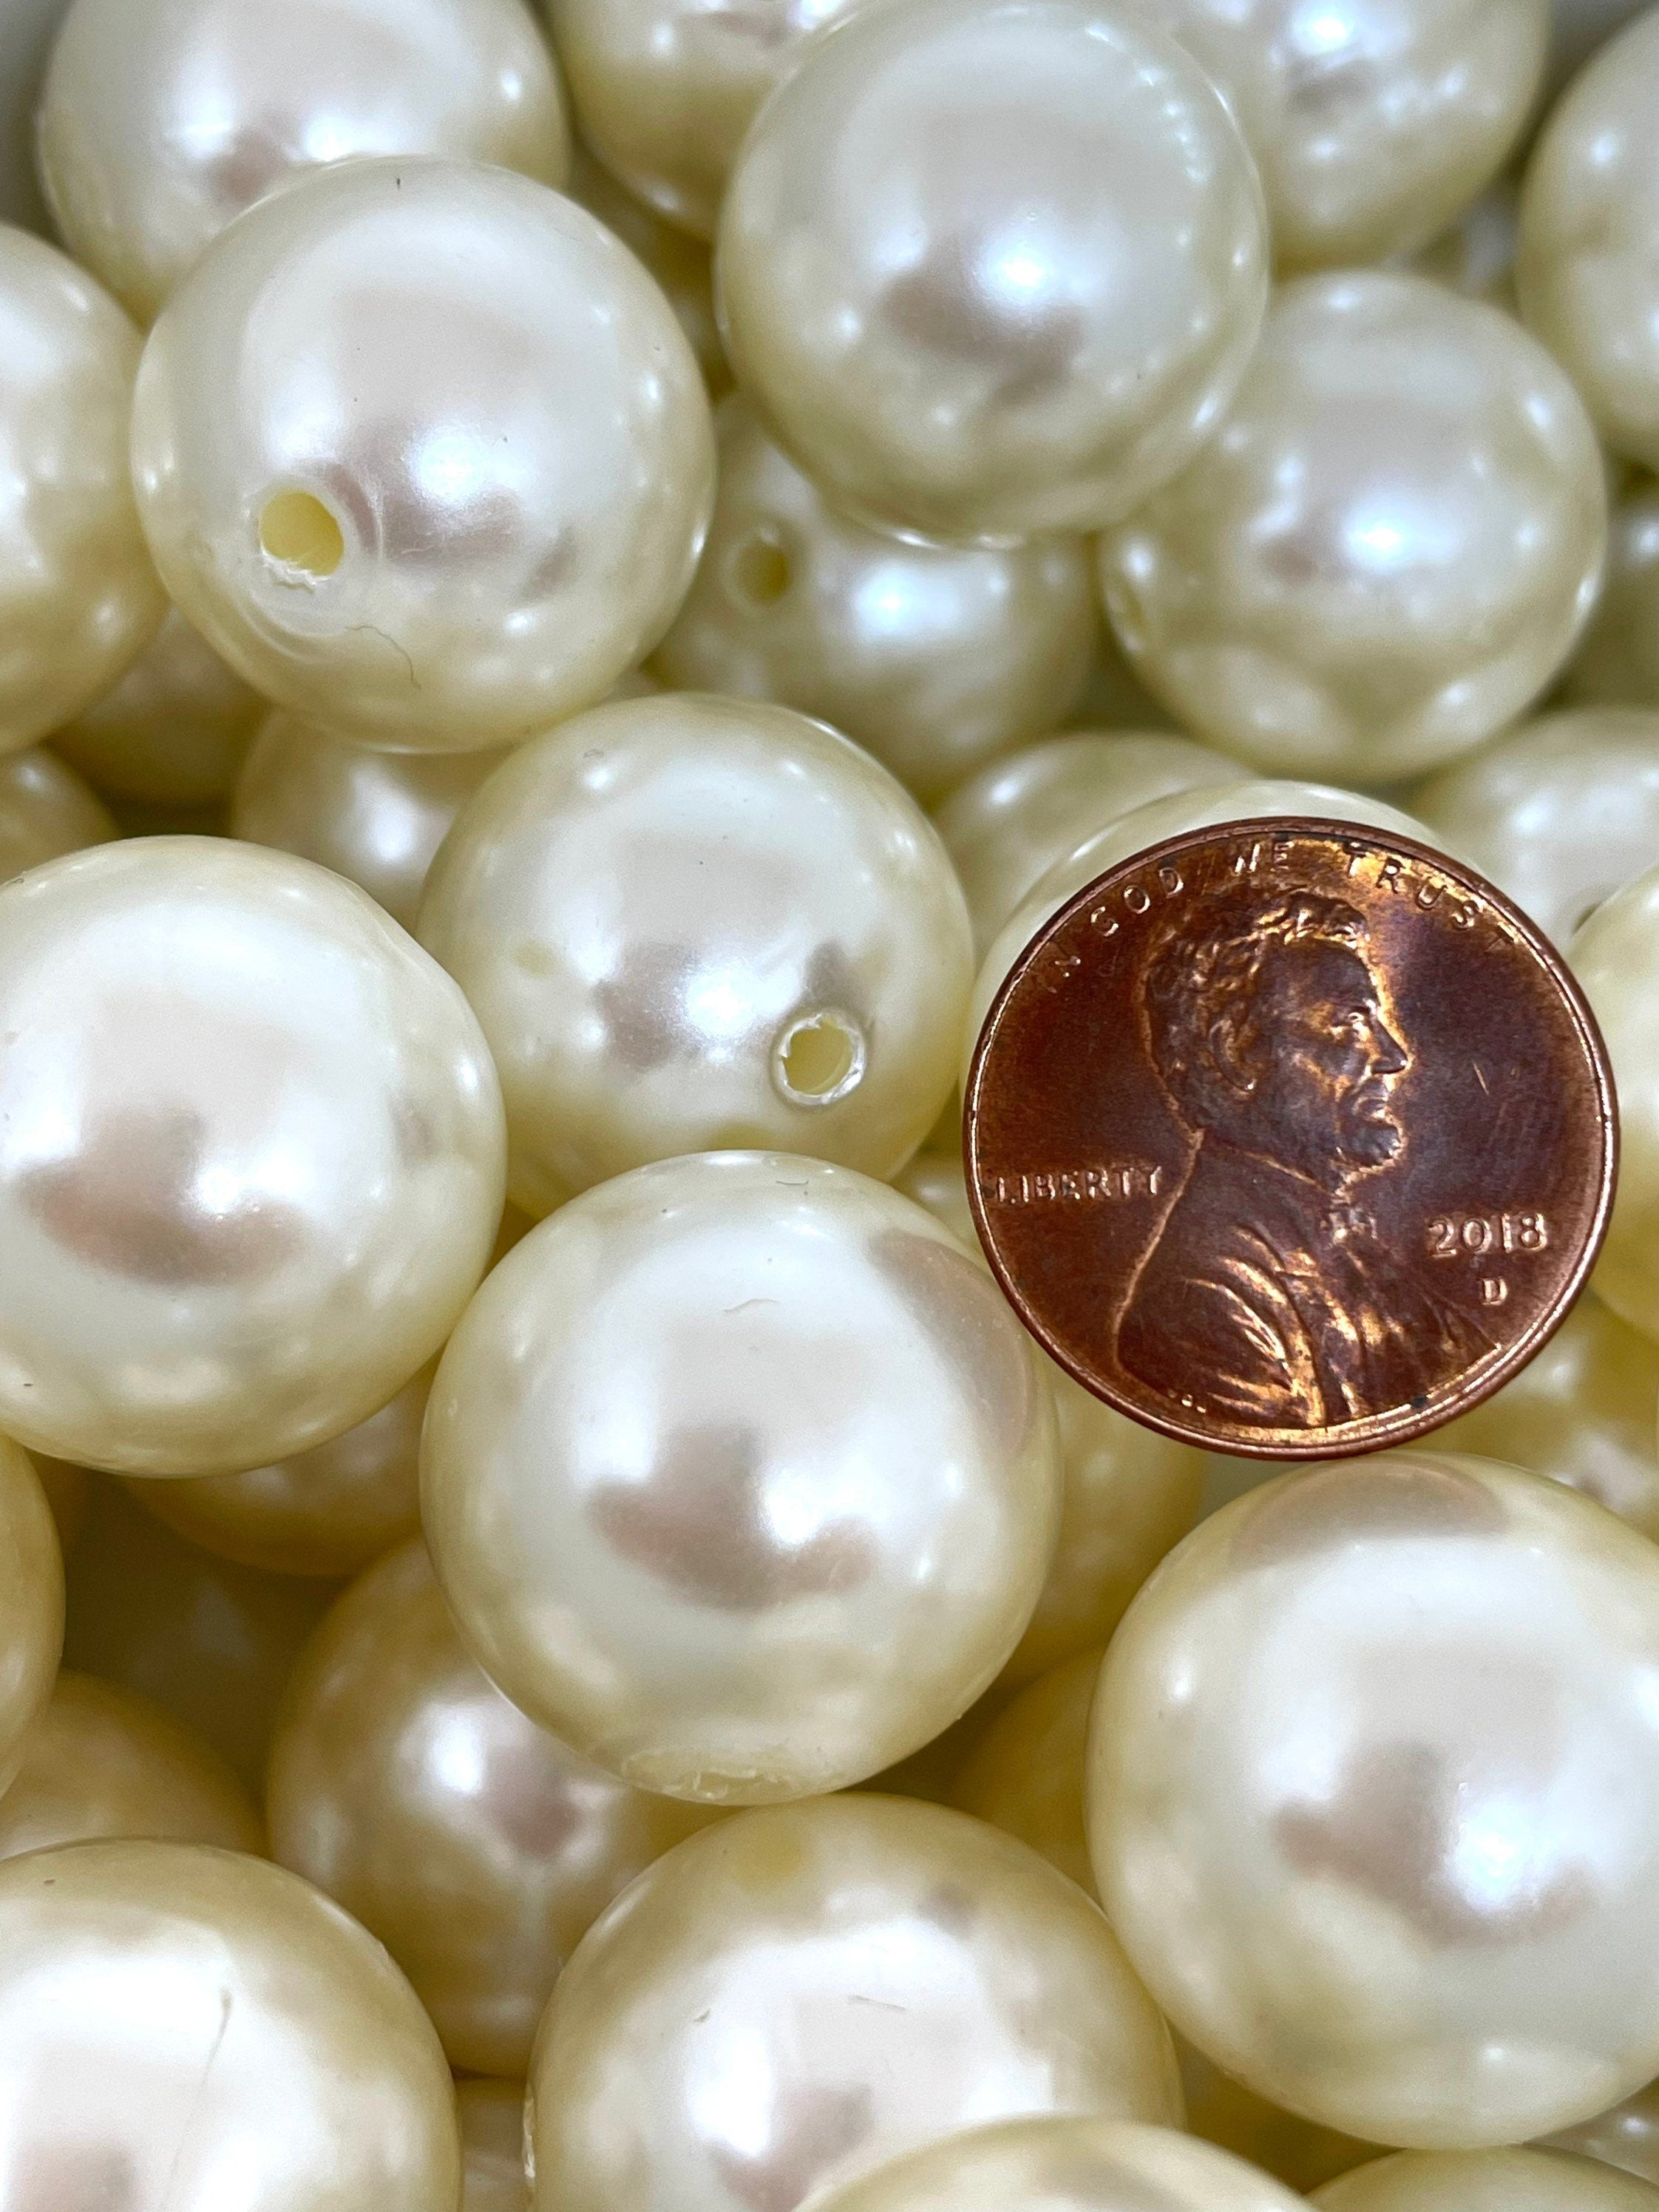 Chunky Ivory Pearl Beads for Jewelry Making, Chunky Beads, 20mm beads, Large Beads for Necklace